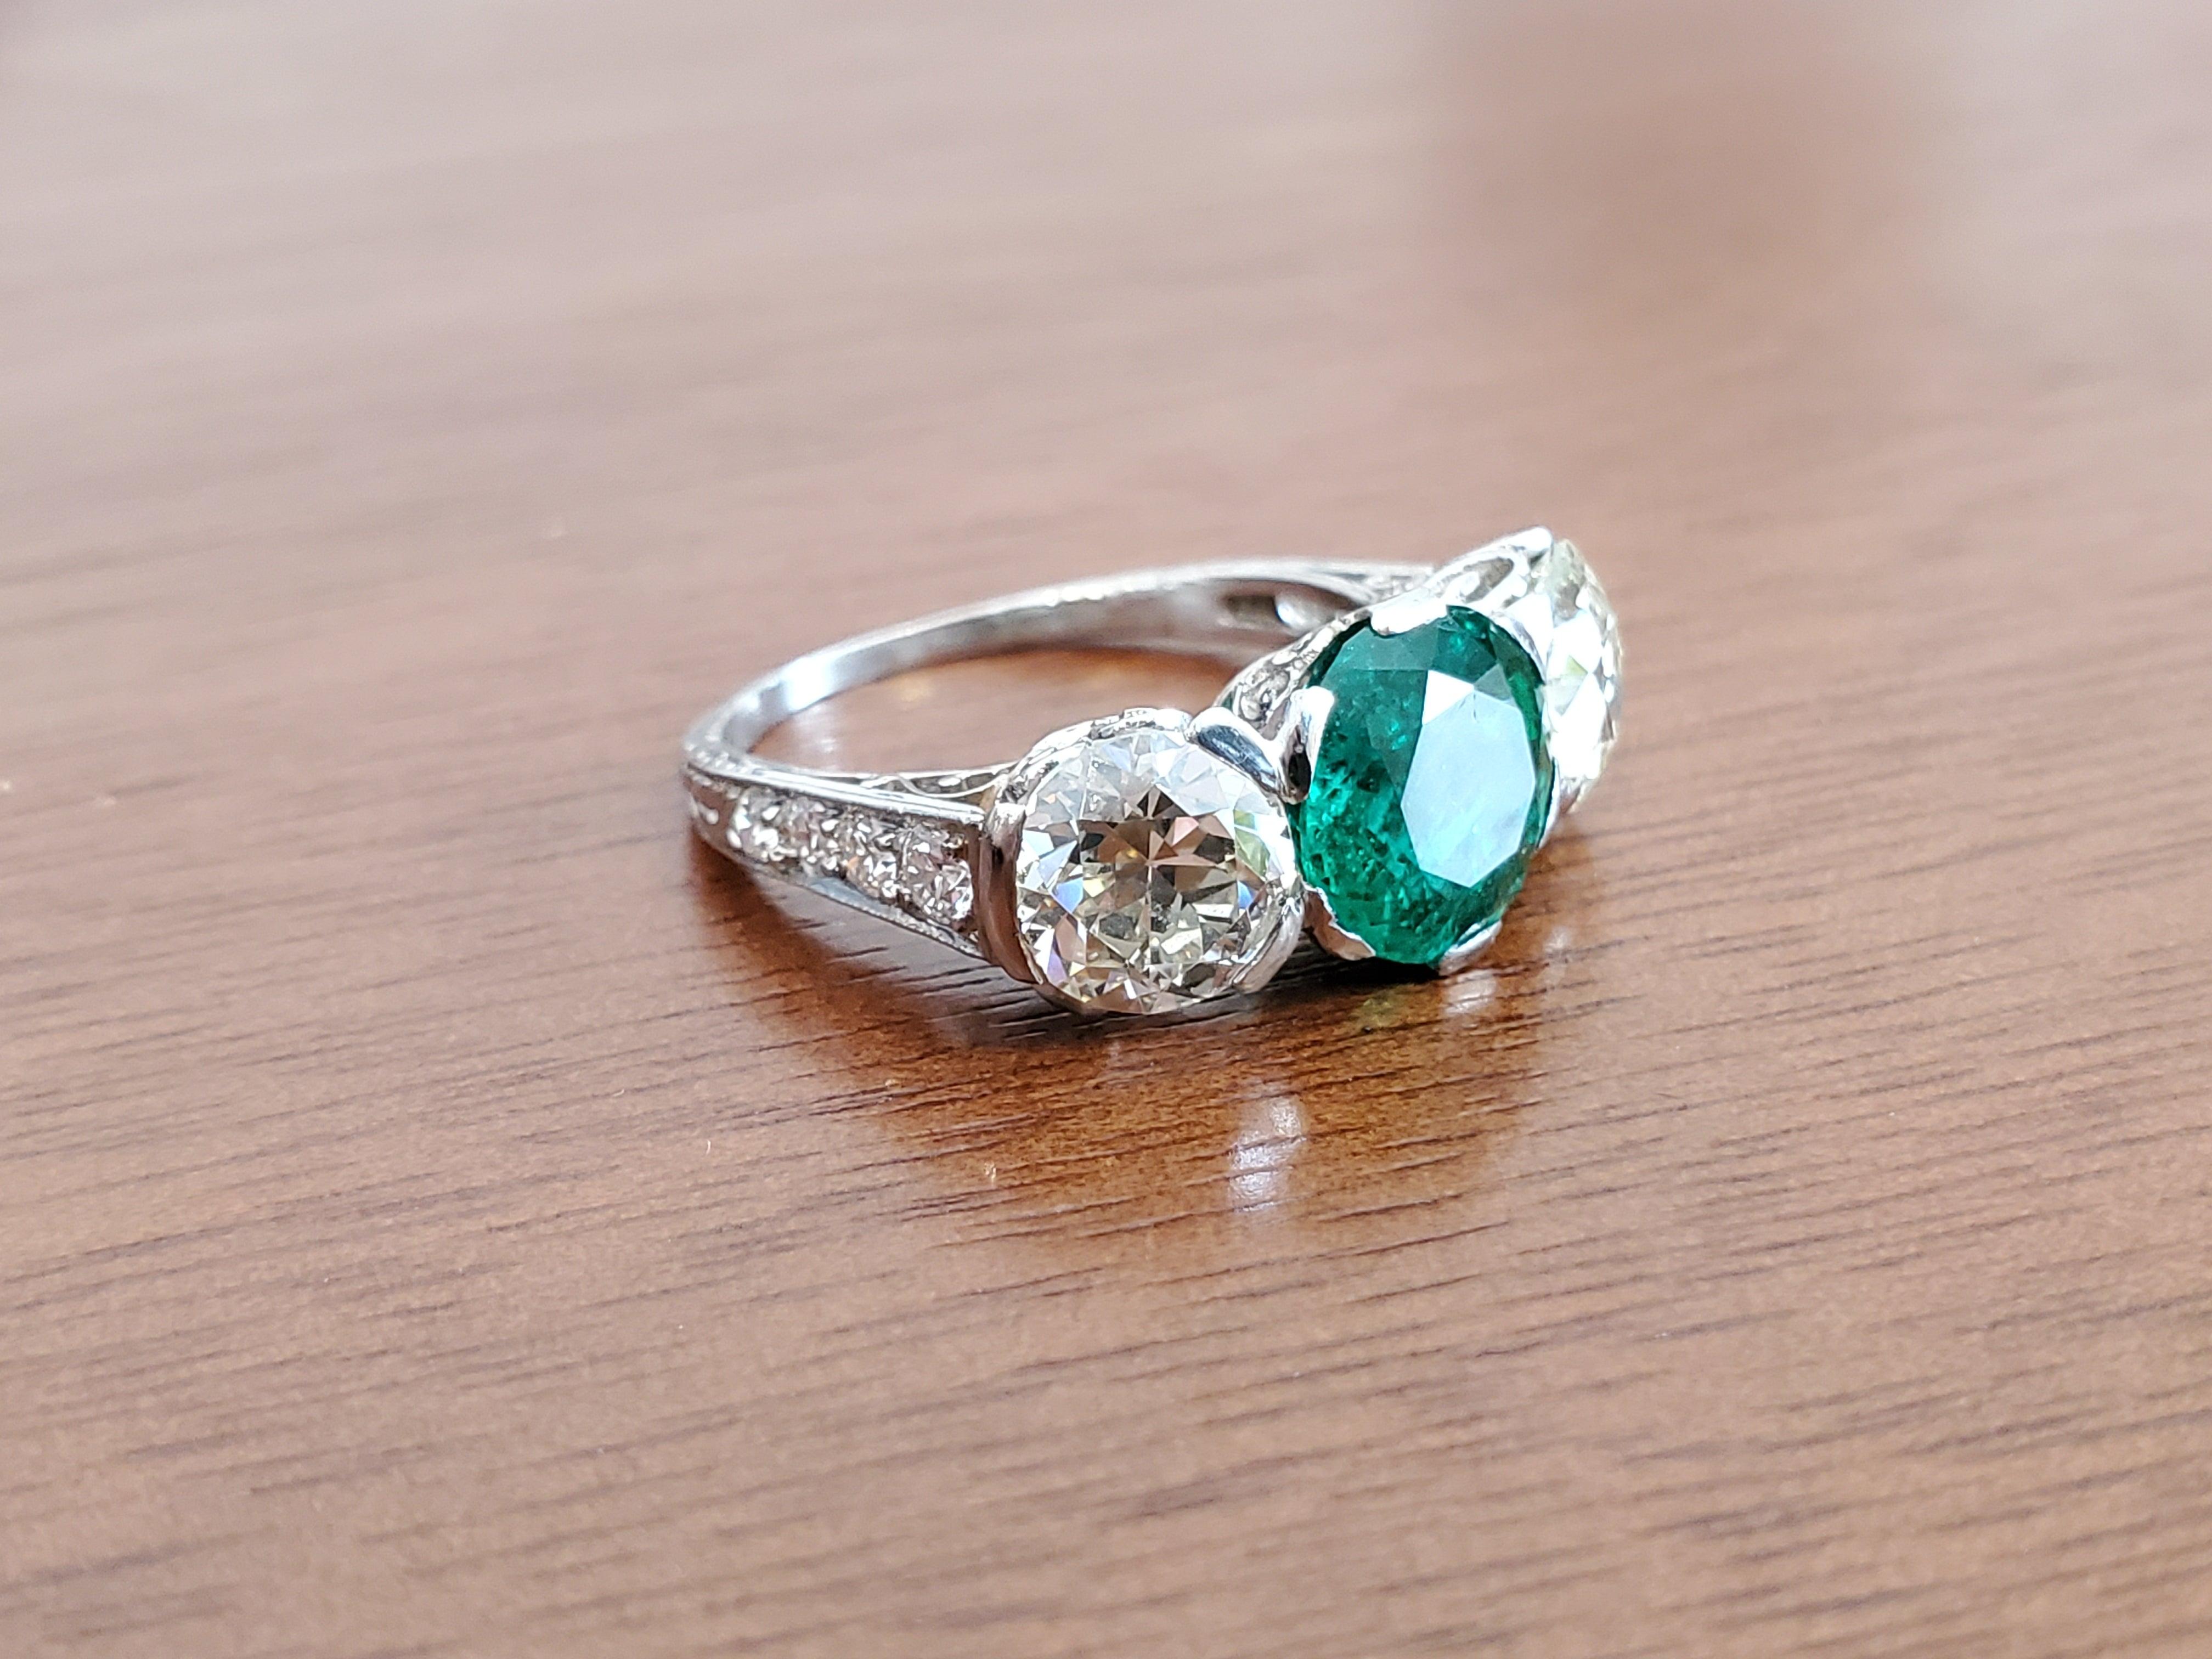 Listed is an original Art Deco Platinum Old European Diamond and Colombian Emerald Ring. There are approximately 3.00 carats of KL color VS-SI1 old European diamonds and a 2.58ct old cut round Colombian Emerald center stone. The color of the emerald